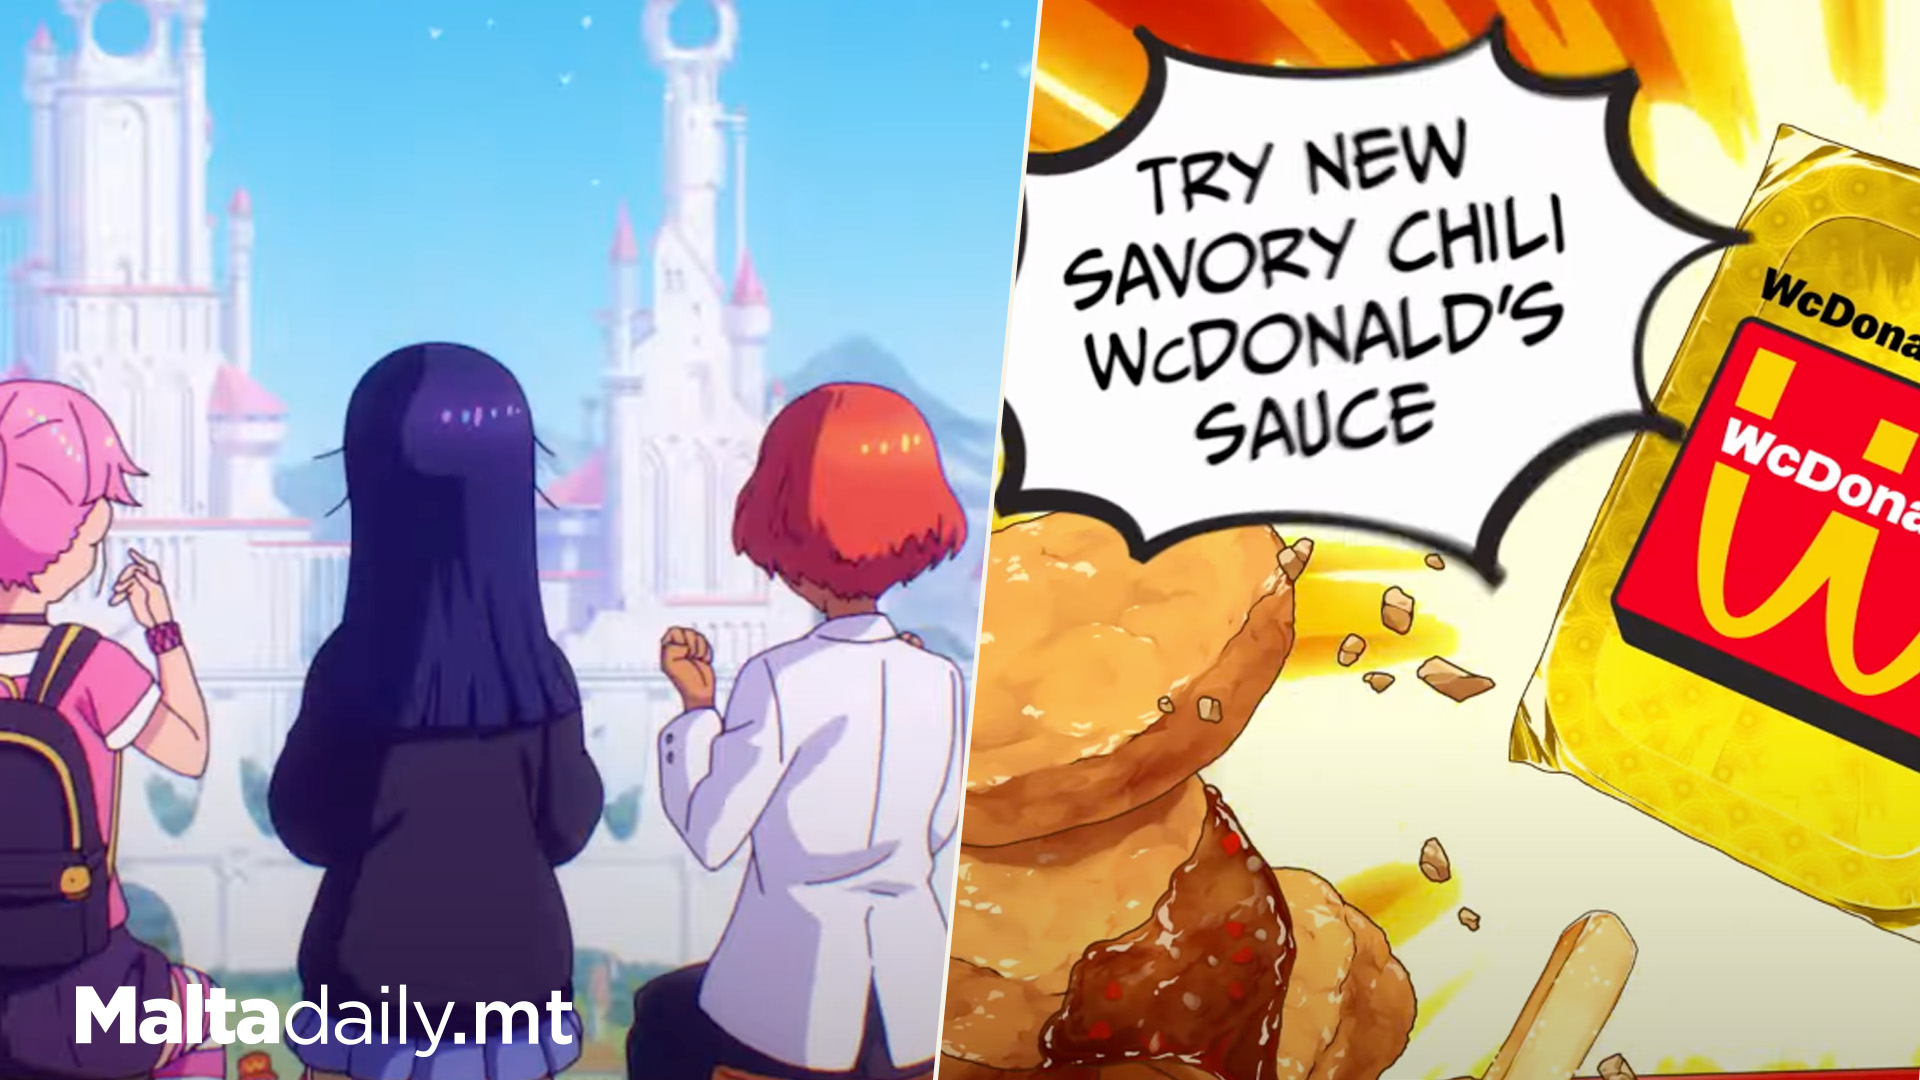 The Wisdom Of The Sauce: Watch WC Donald's Anime Episode 4!